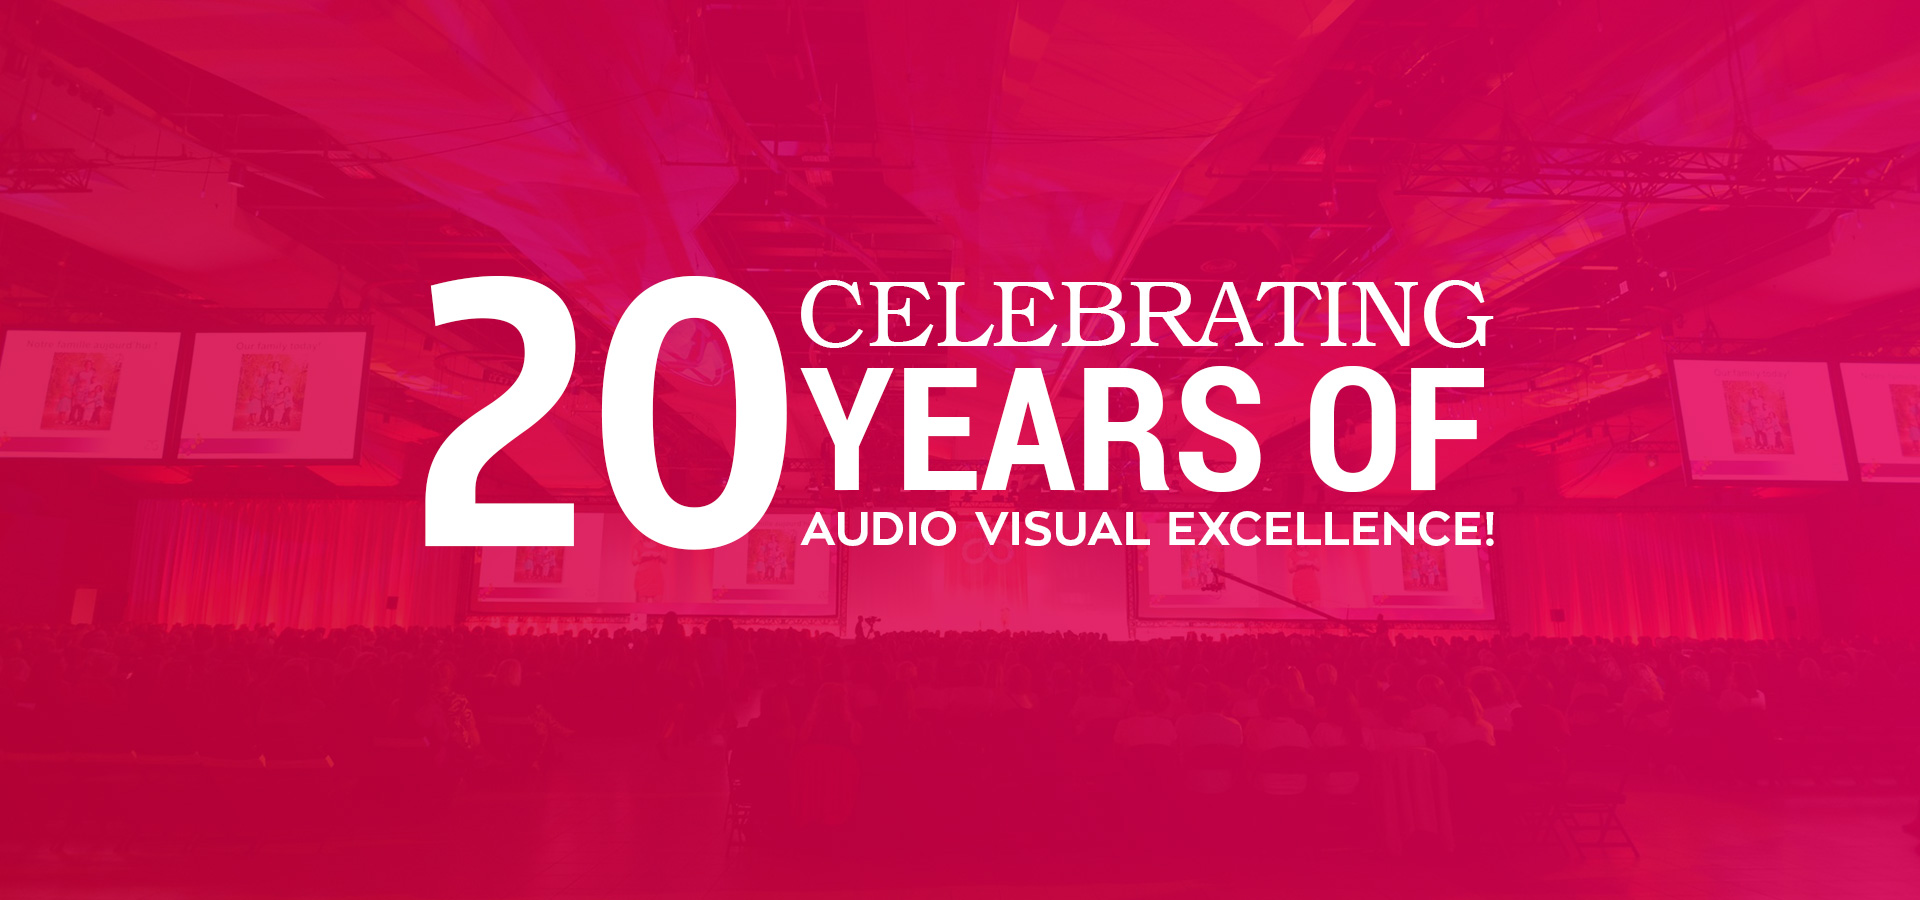 Celebrating 20 Years Of Audio Visual Excellence